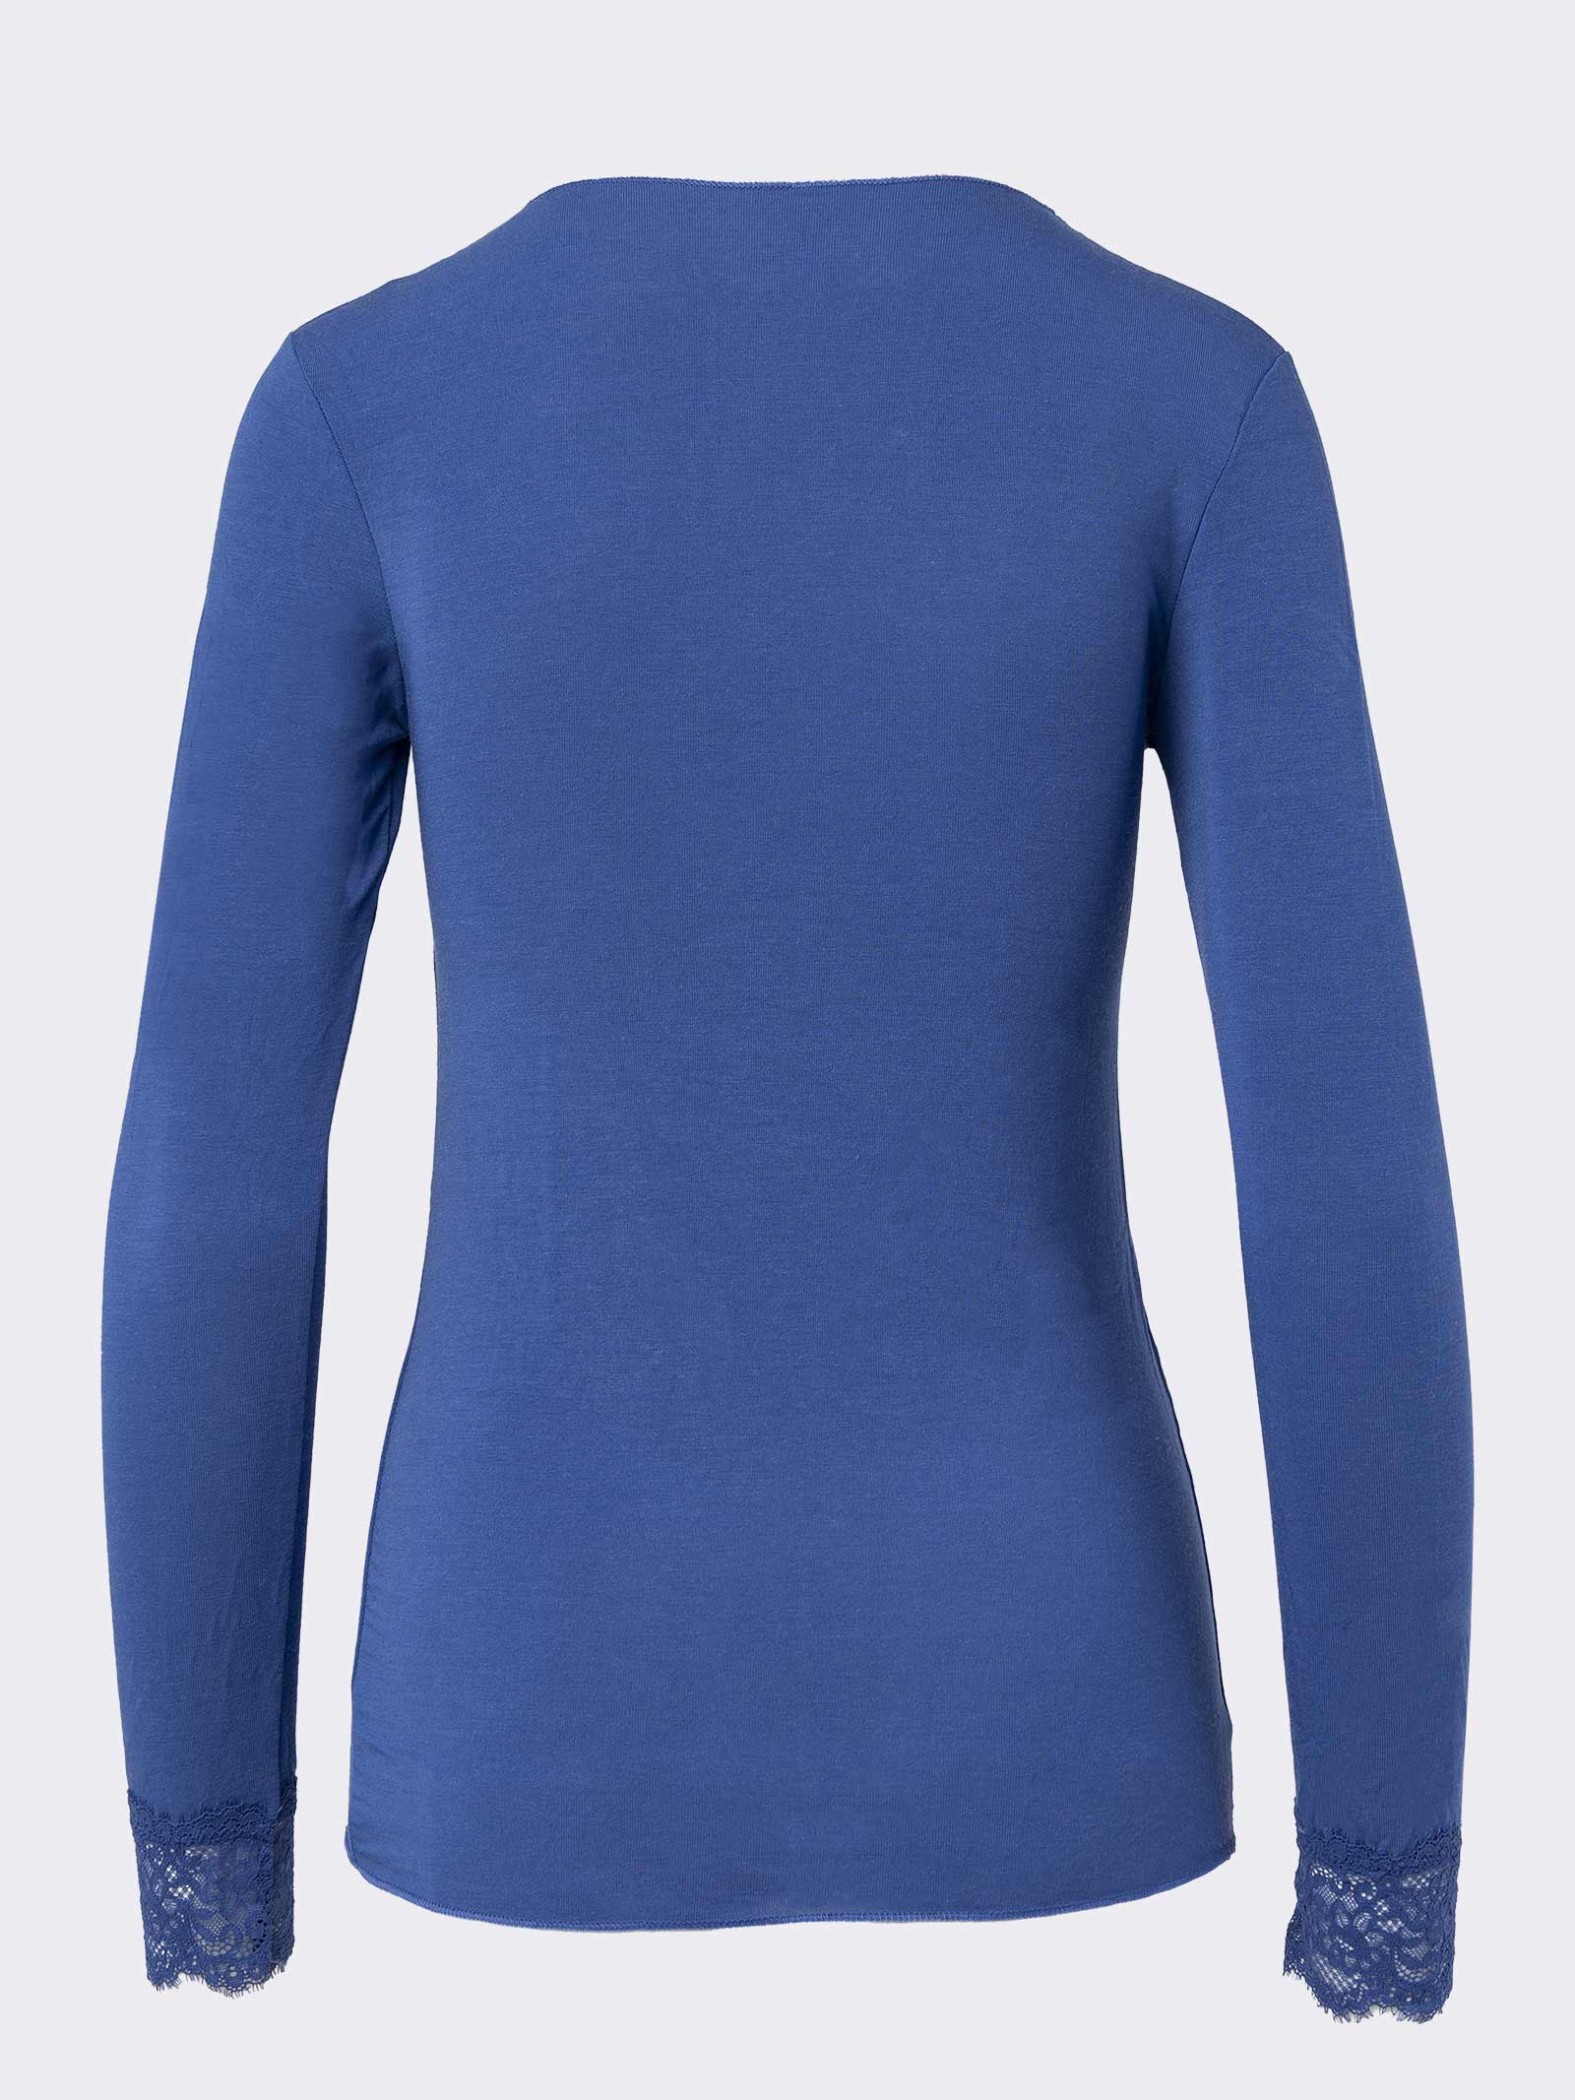 Women's Cashmere and Lace Long-Sleeved Knitwear - Elegant and Warm